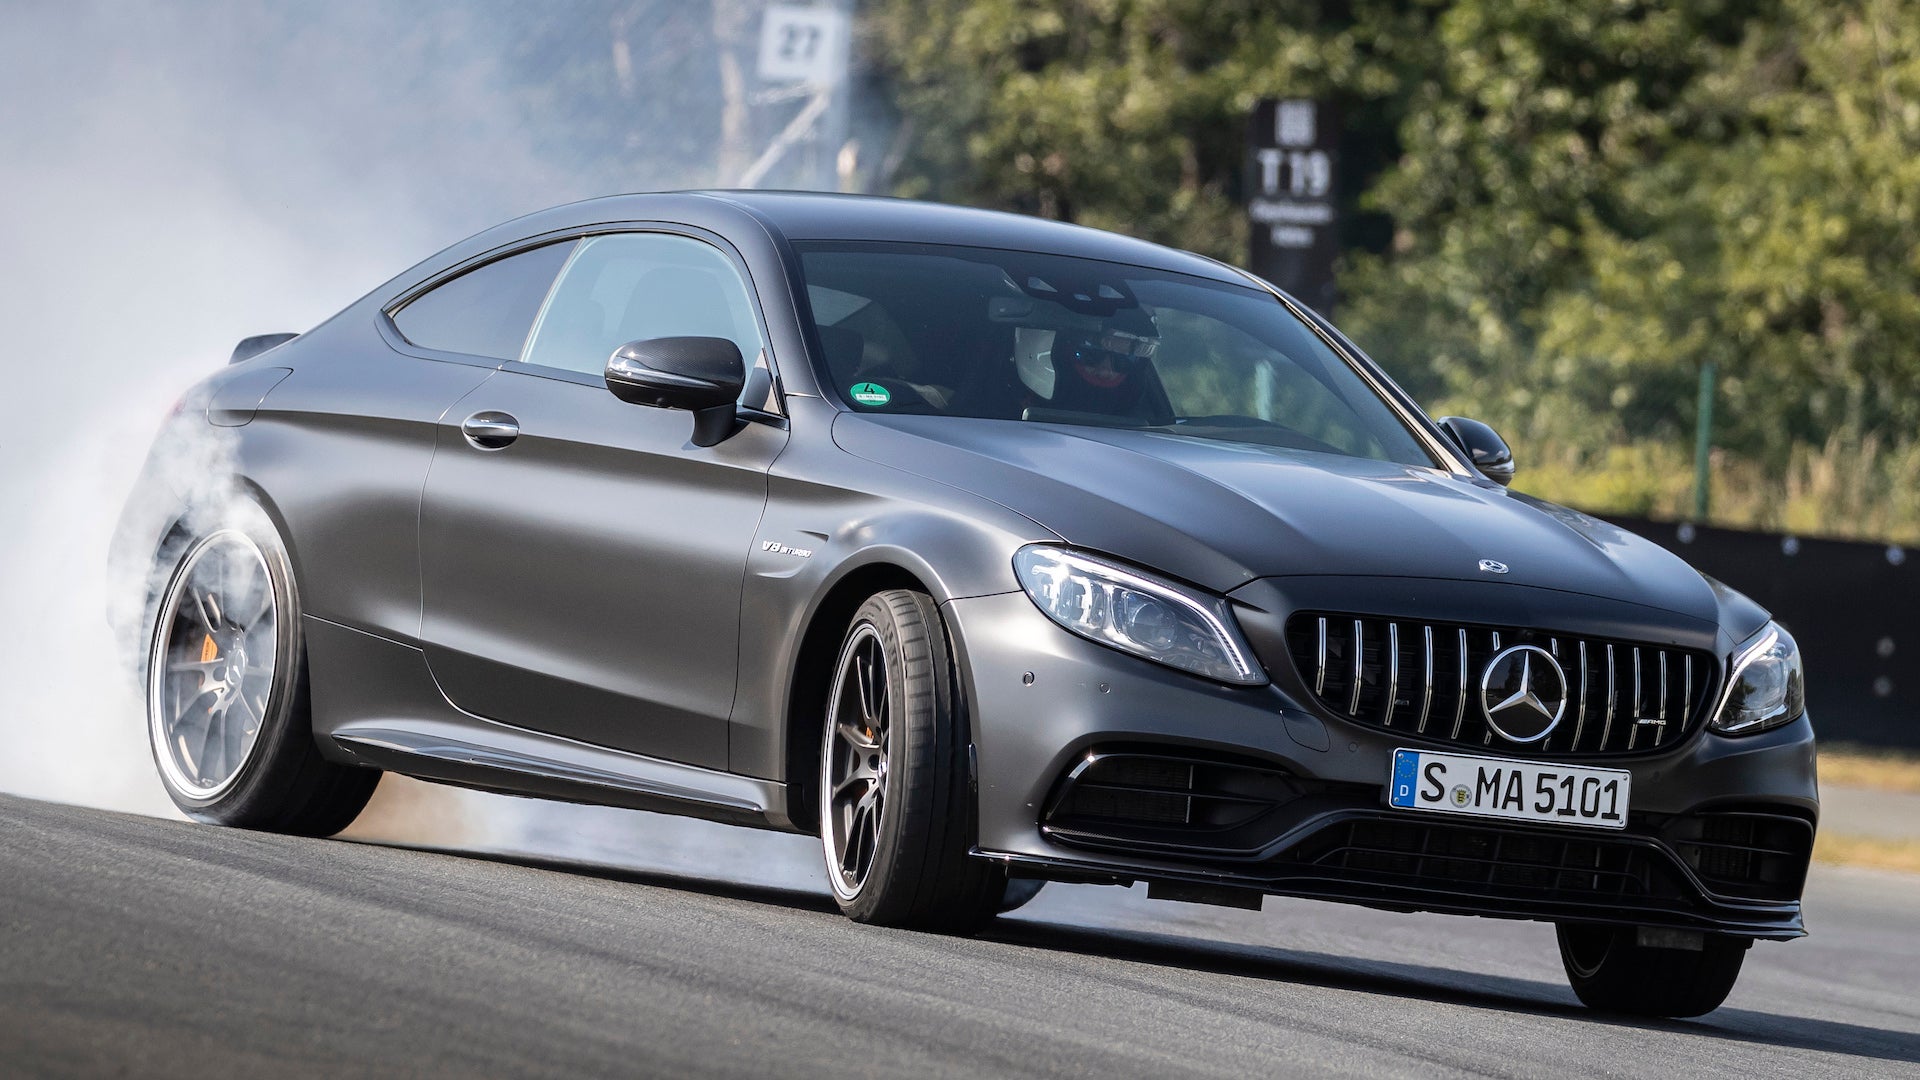 2021 Mercedes-AMG C63 Could Trade Turbo V8 for Hybrid Four-Cylinder: Report